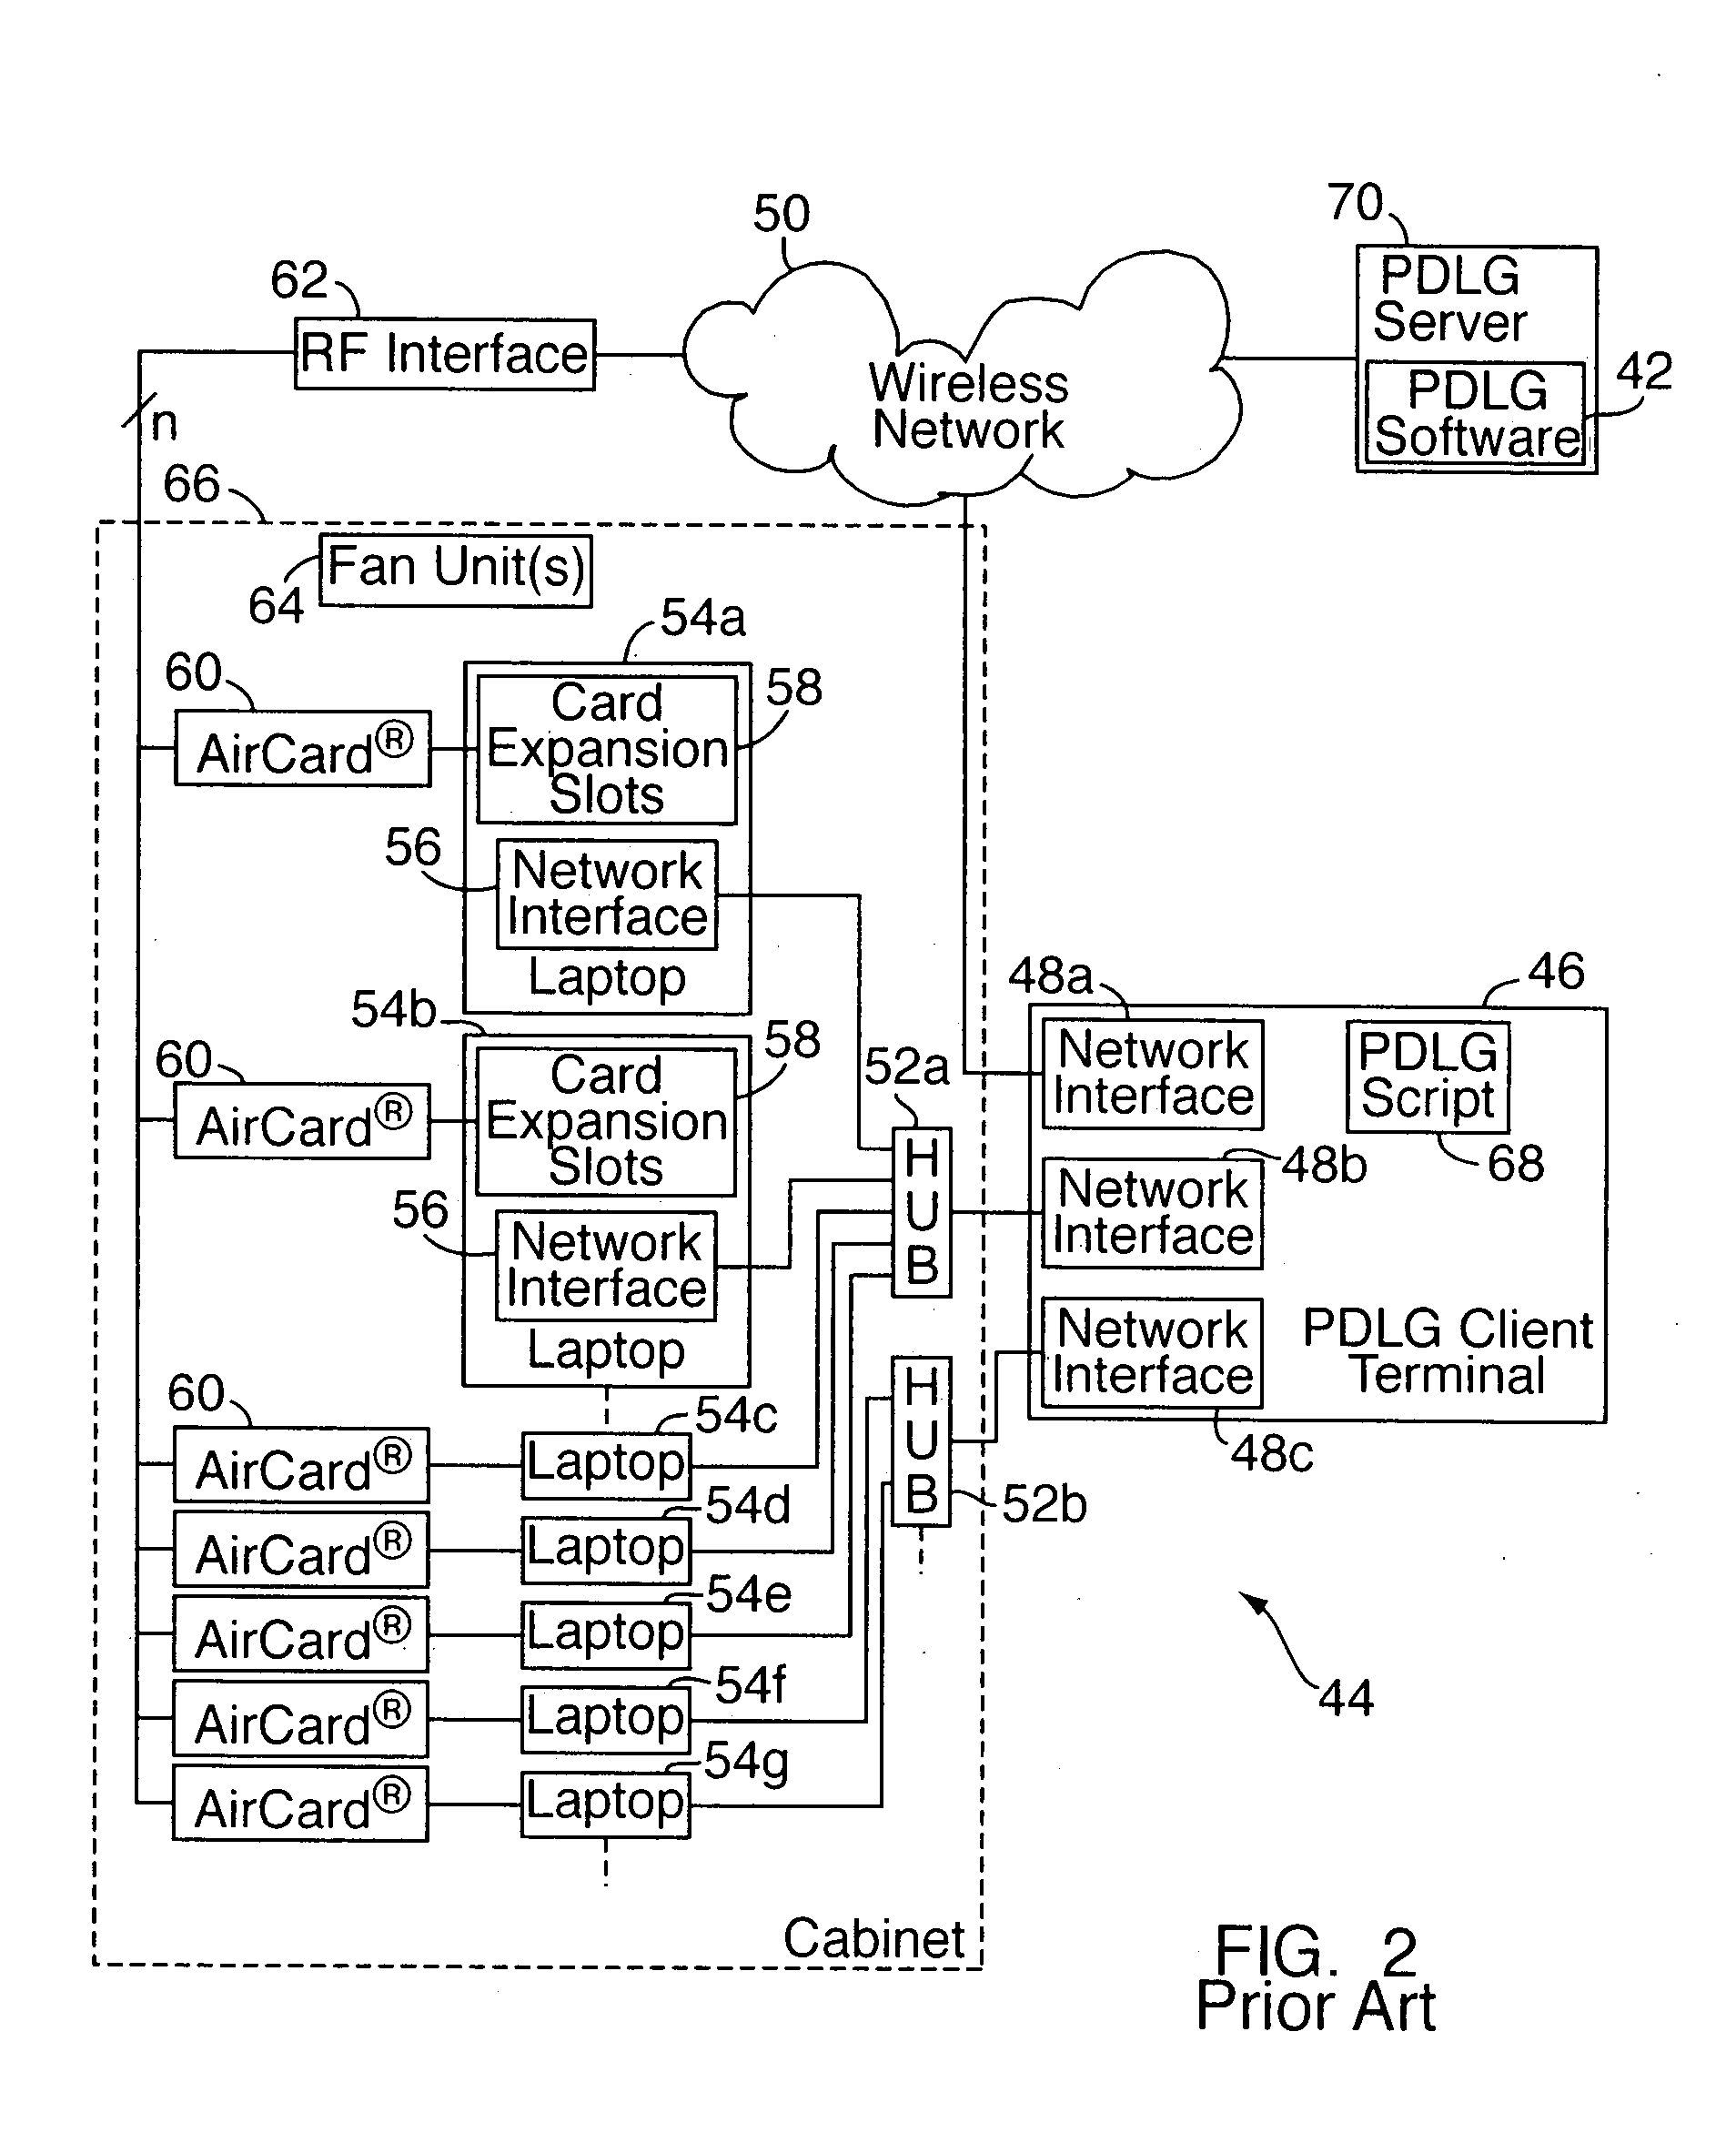 Packet data load generator system for 1x-EVDO wireless network